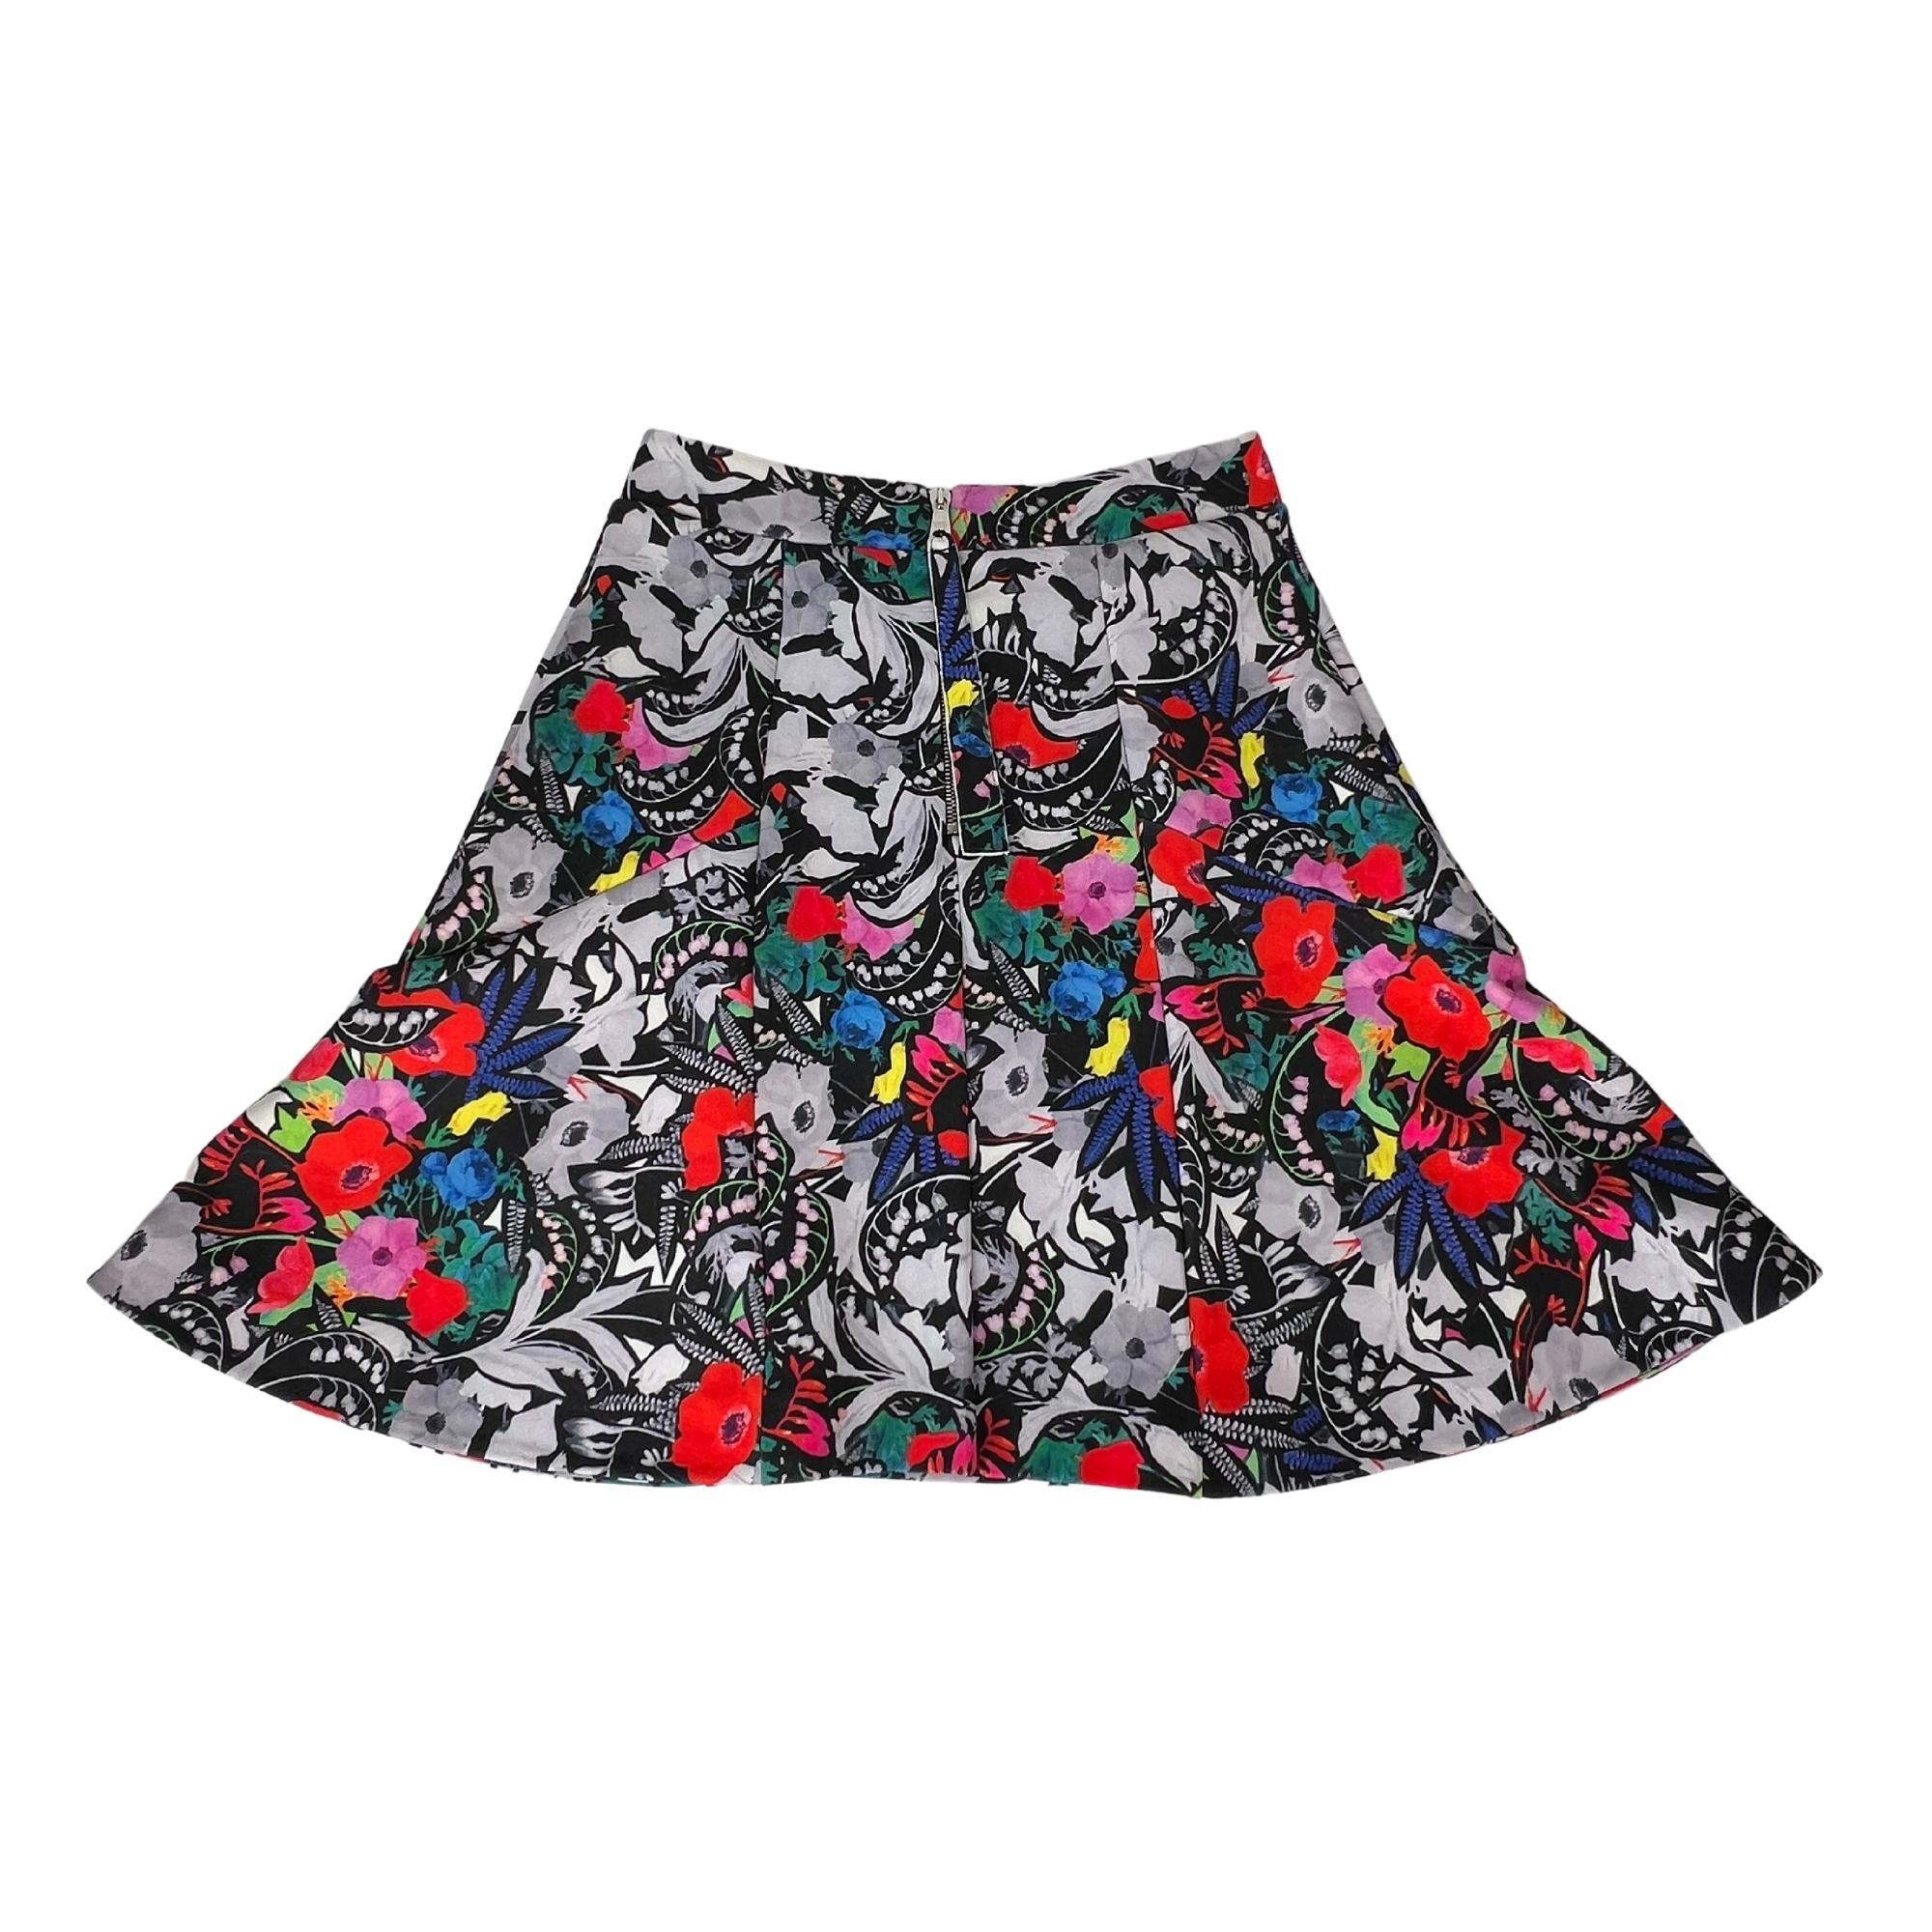 Sonia by Sonia Rykiel Floral Print Mini Skirt (Small) For Sale 2